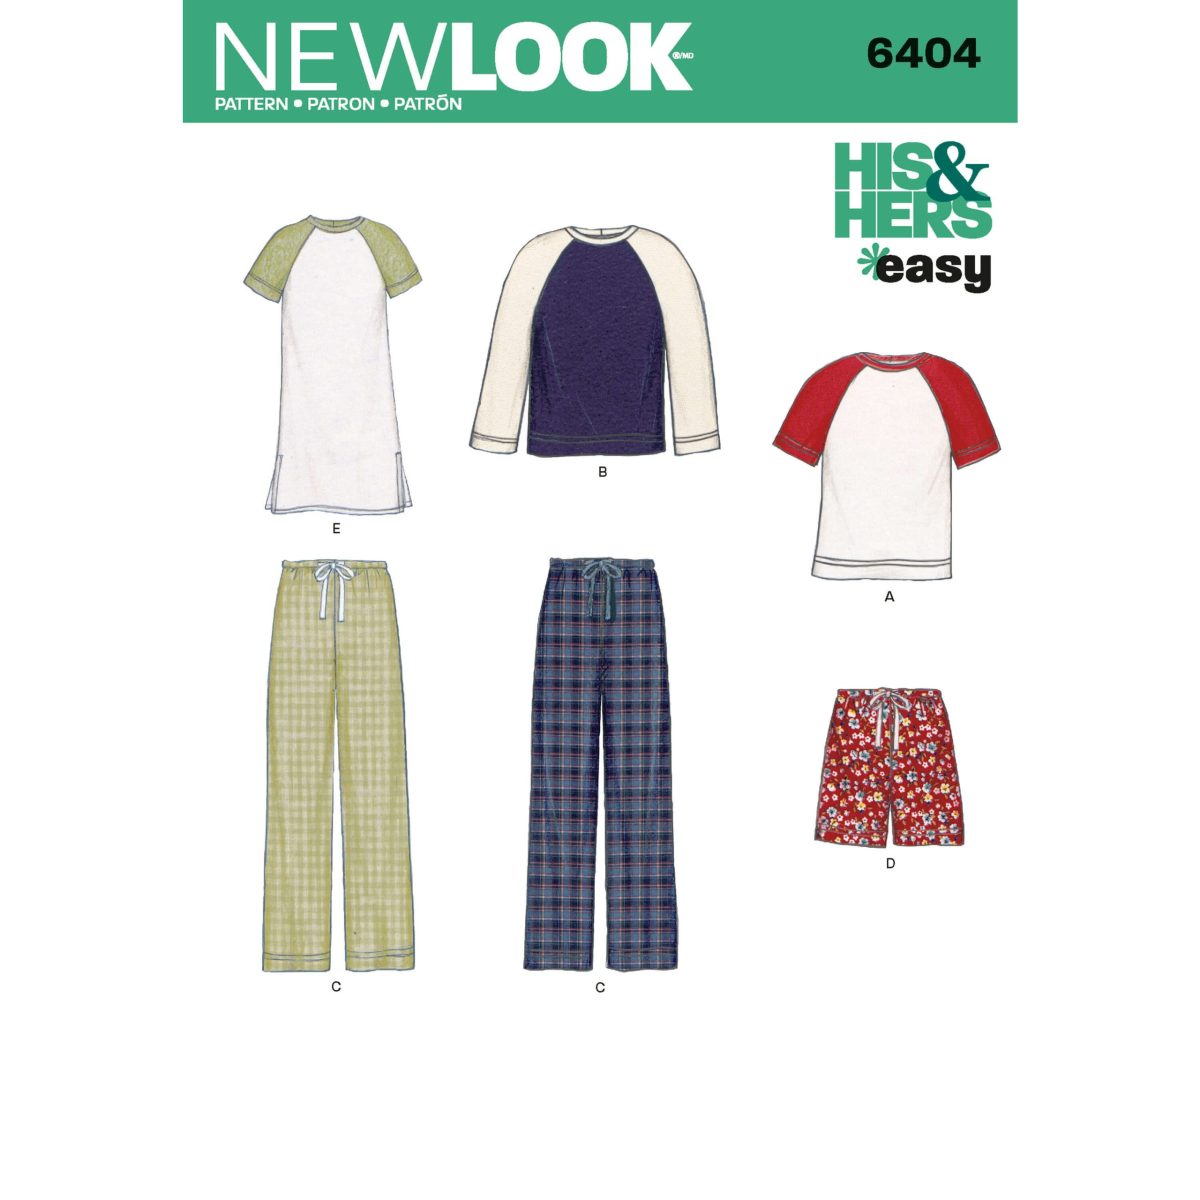 New Look Sewing Pattern N6404 Misses' and Men's Separates